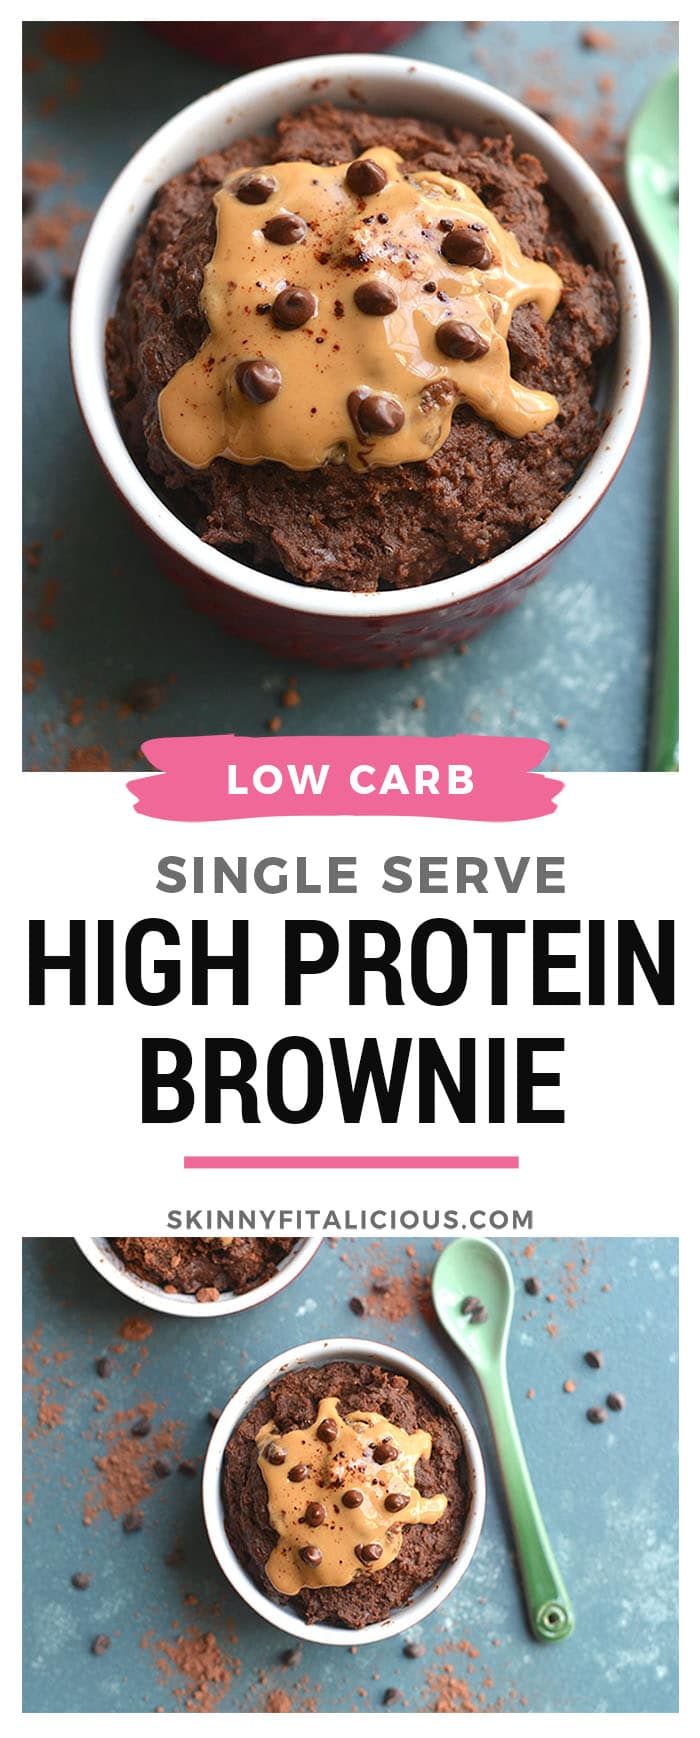 Single Serve High Protein Brownie! Get your chocolate fix with this easy 5-minute microwave brownie recipe. Loaded with protein & healthy fat, this sweet treat is perfect for those watching their weight, counting macros or who want to eat chocolate without going overboard! Gluten Free + Low Calorie + Low Carb + Paleo 